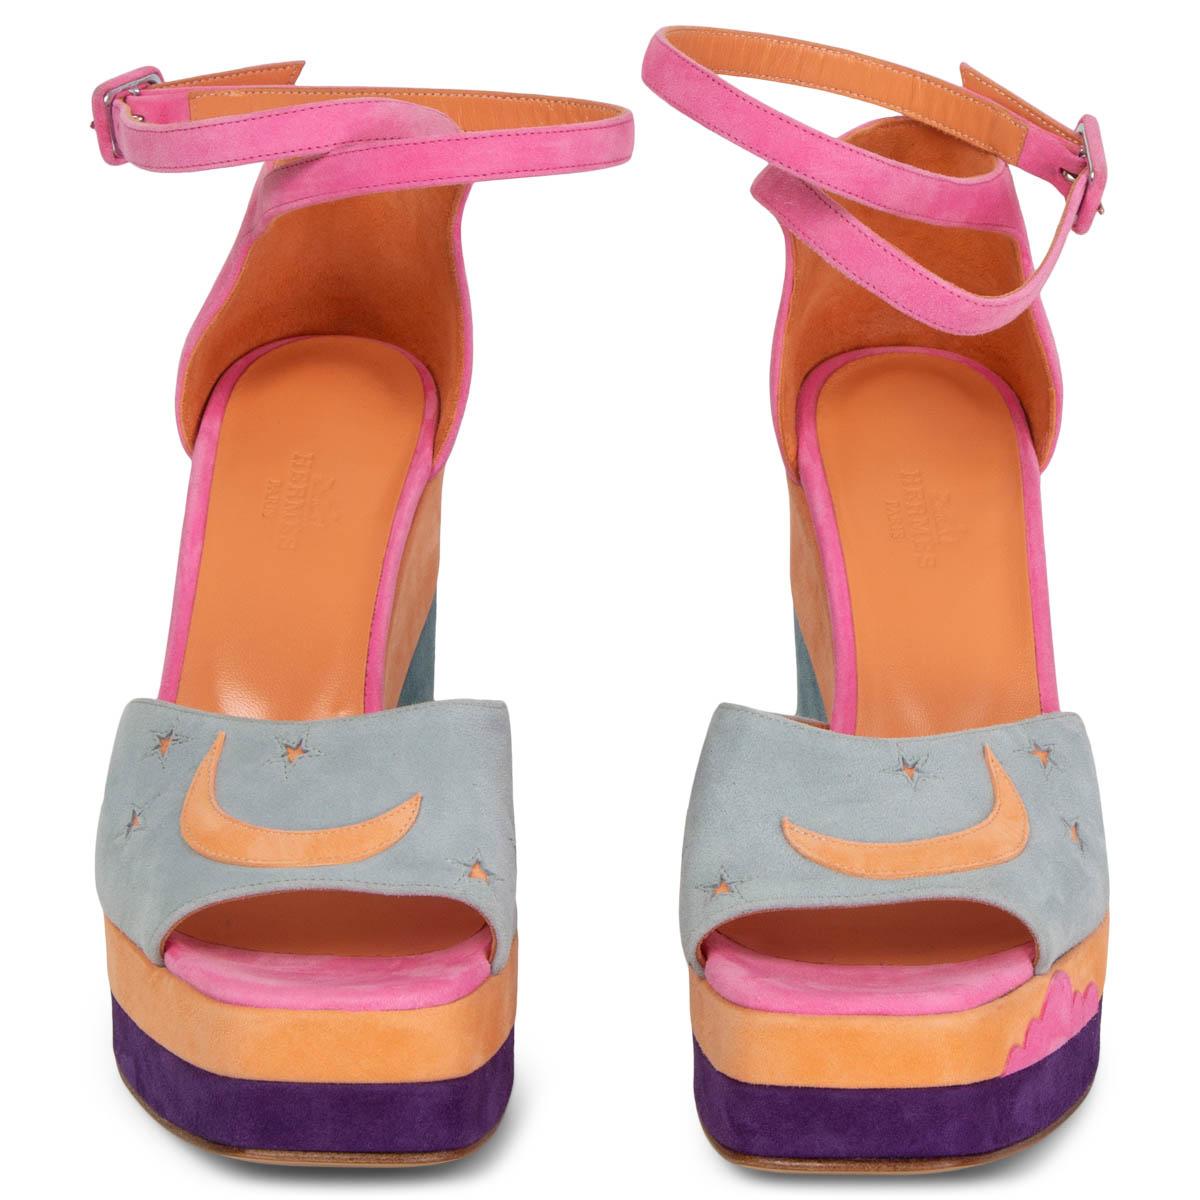 100% authentic Hermès Tournis ankle-strap wedge sandals  in pastel orange, yellow, blue, neon pink and purple suede. Brand new. Come with dust bag. Spring/summer 2019 collection.

Measurements
Imprinted Size	38.5
Shoe Size	38.5
Inside Sole	25cm